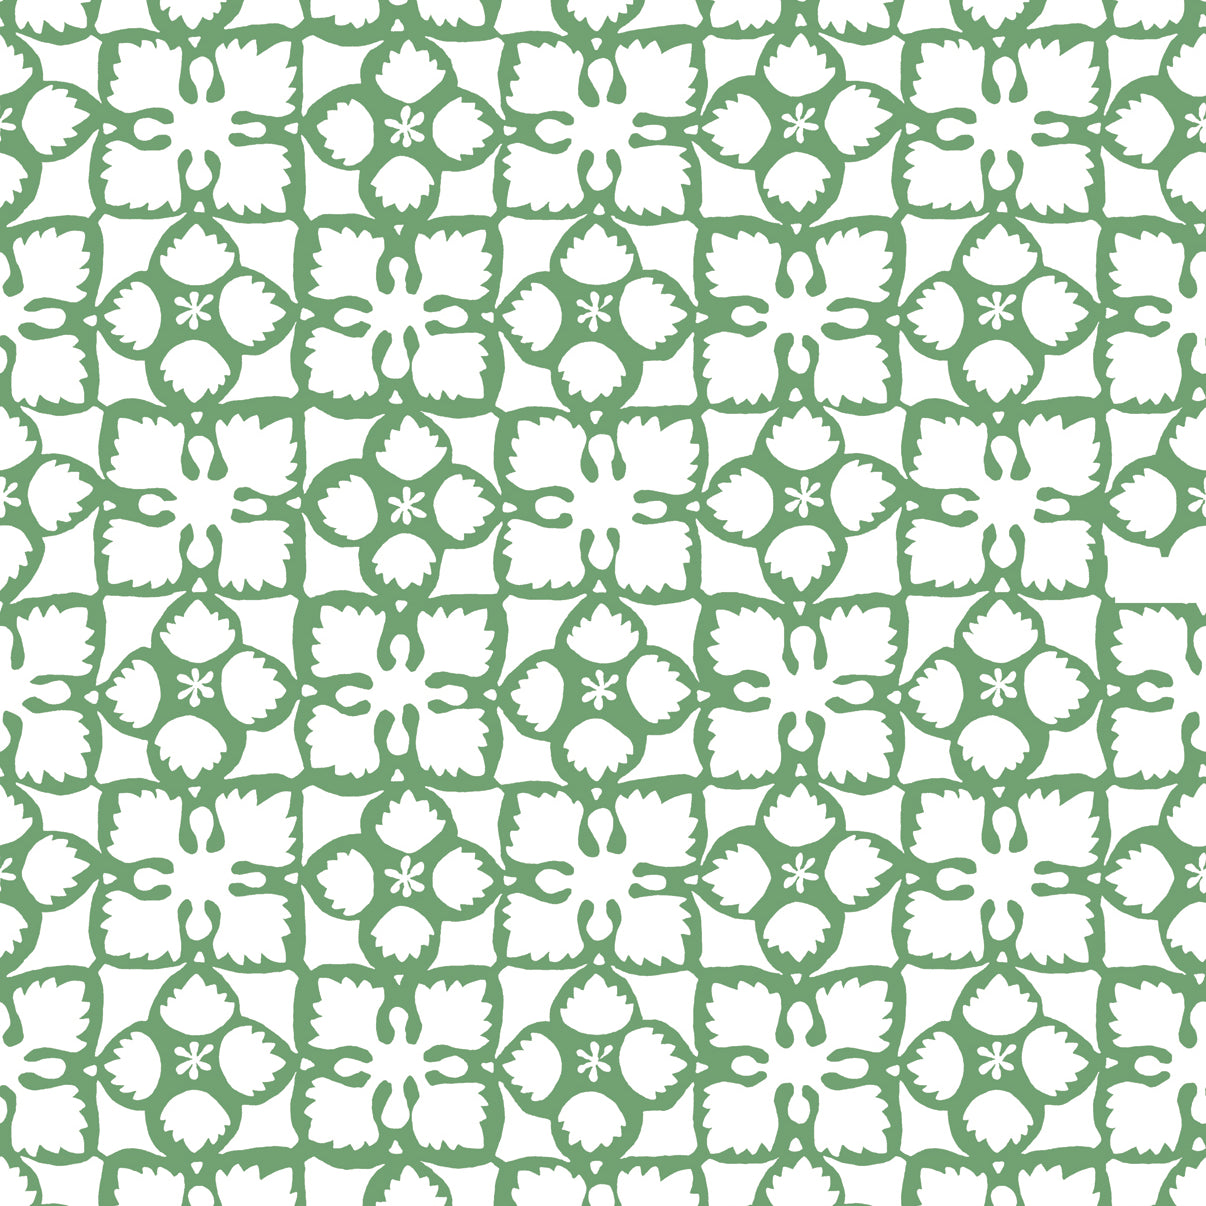 Detail of wallpaper in a botanical lattice print in green on a white field.